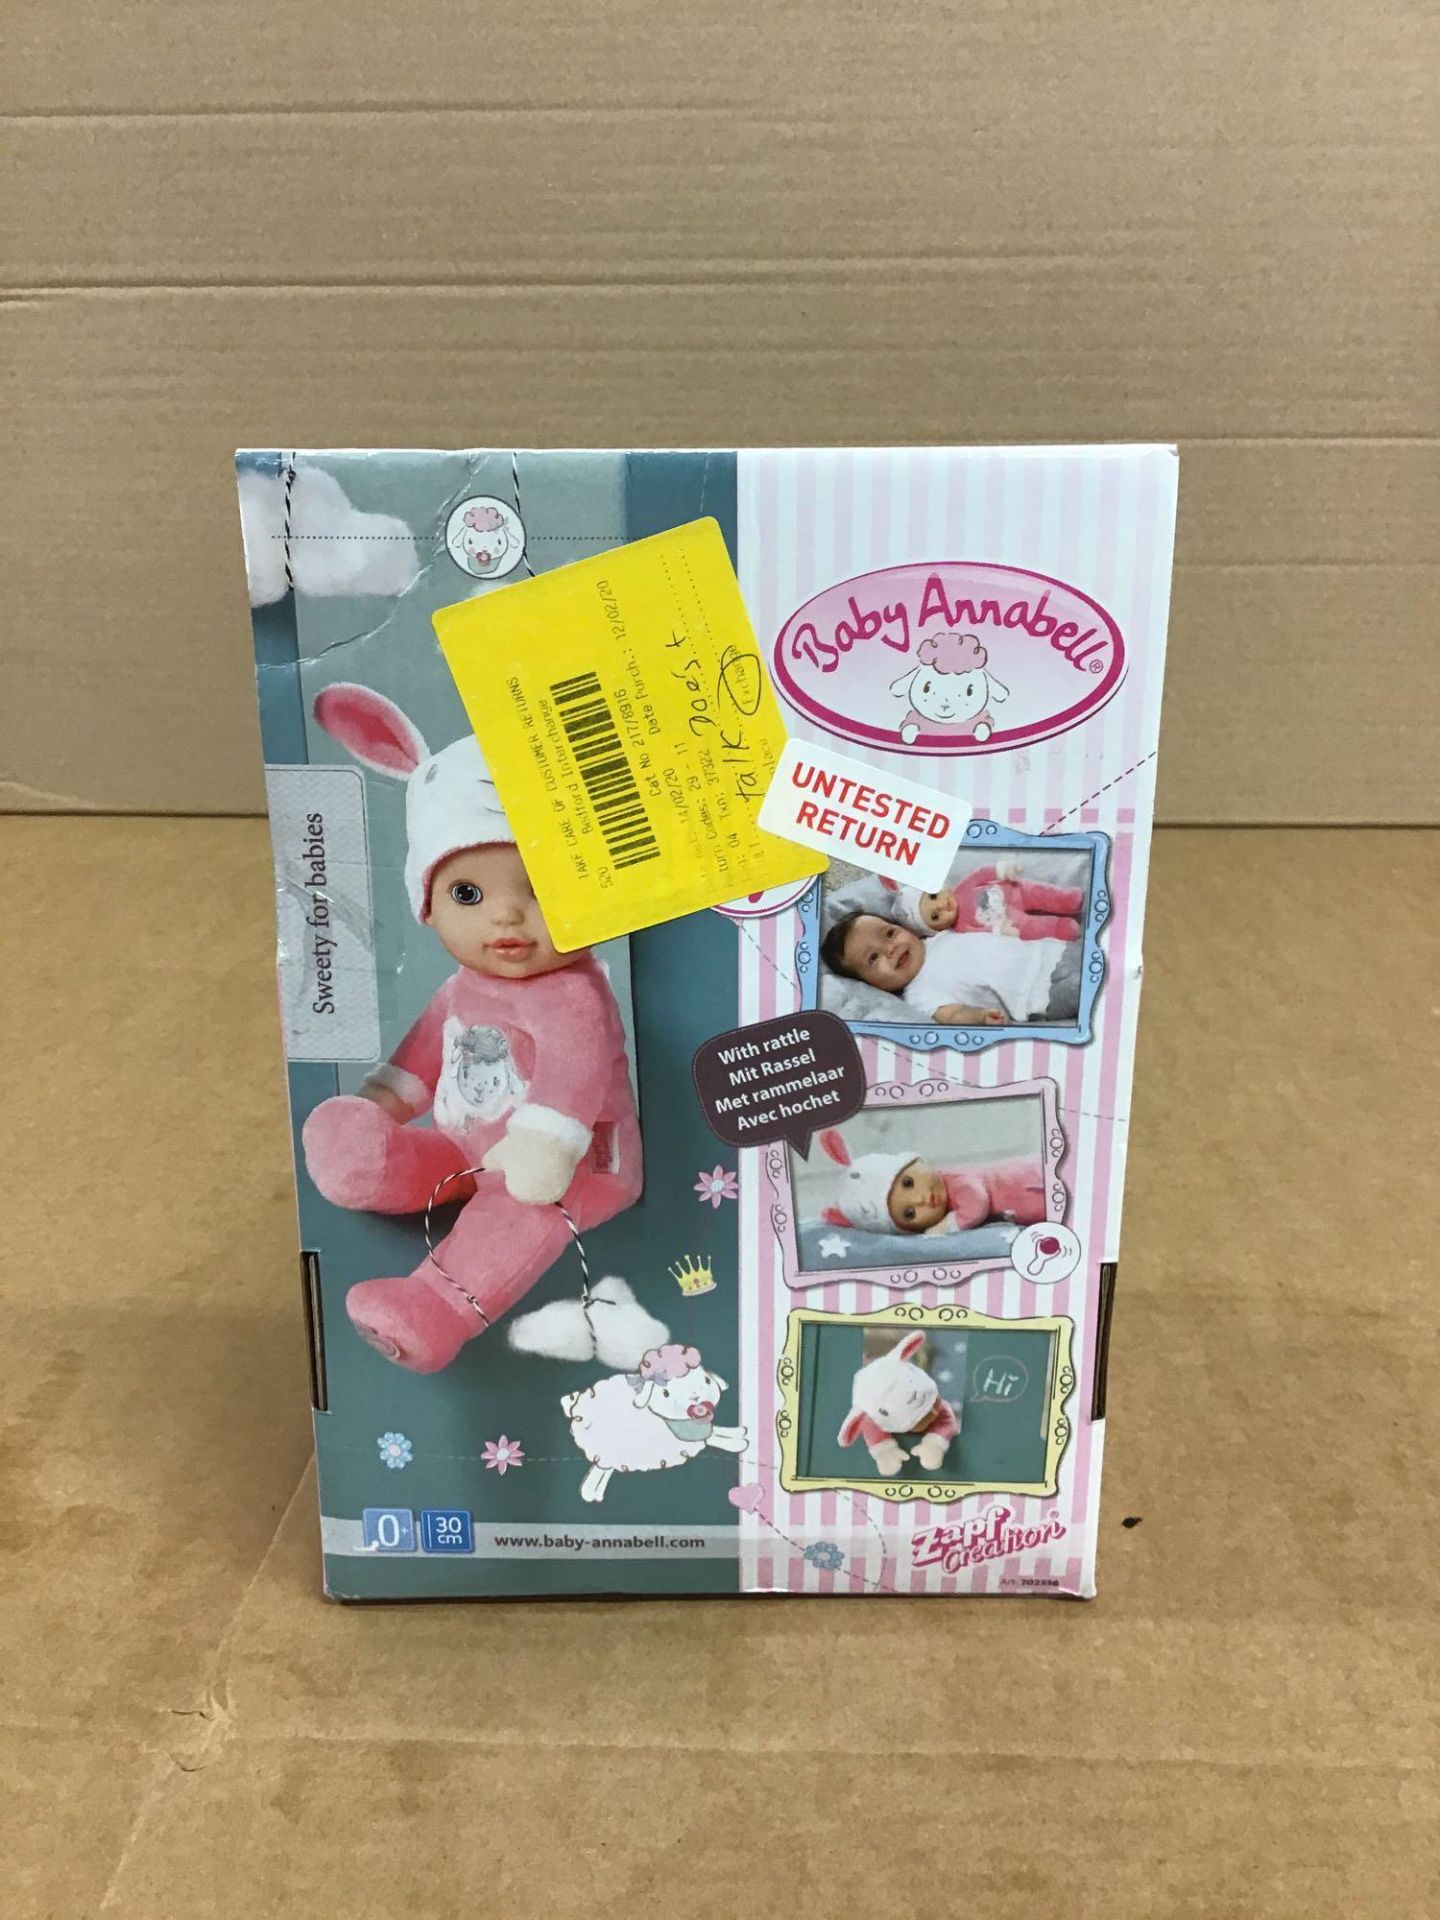 Baby Annabell Newborn Doll, £10.00 RRP - Image 3 of 6